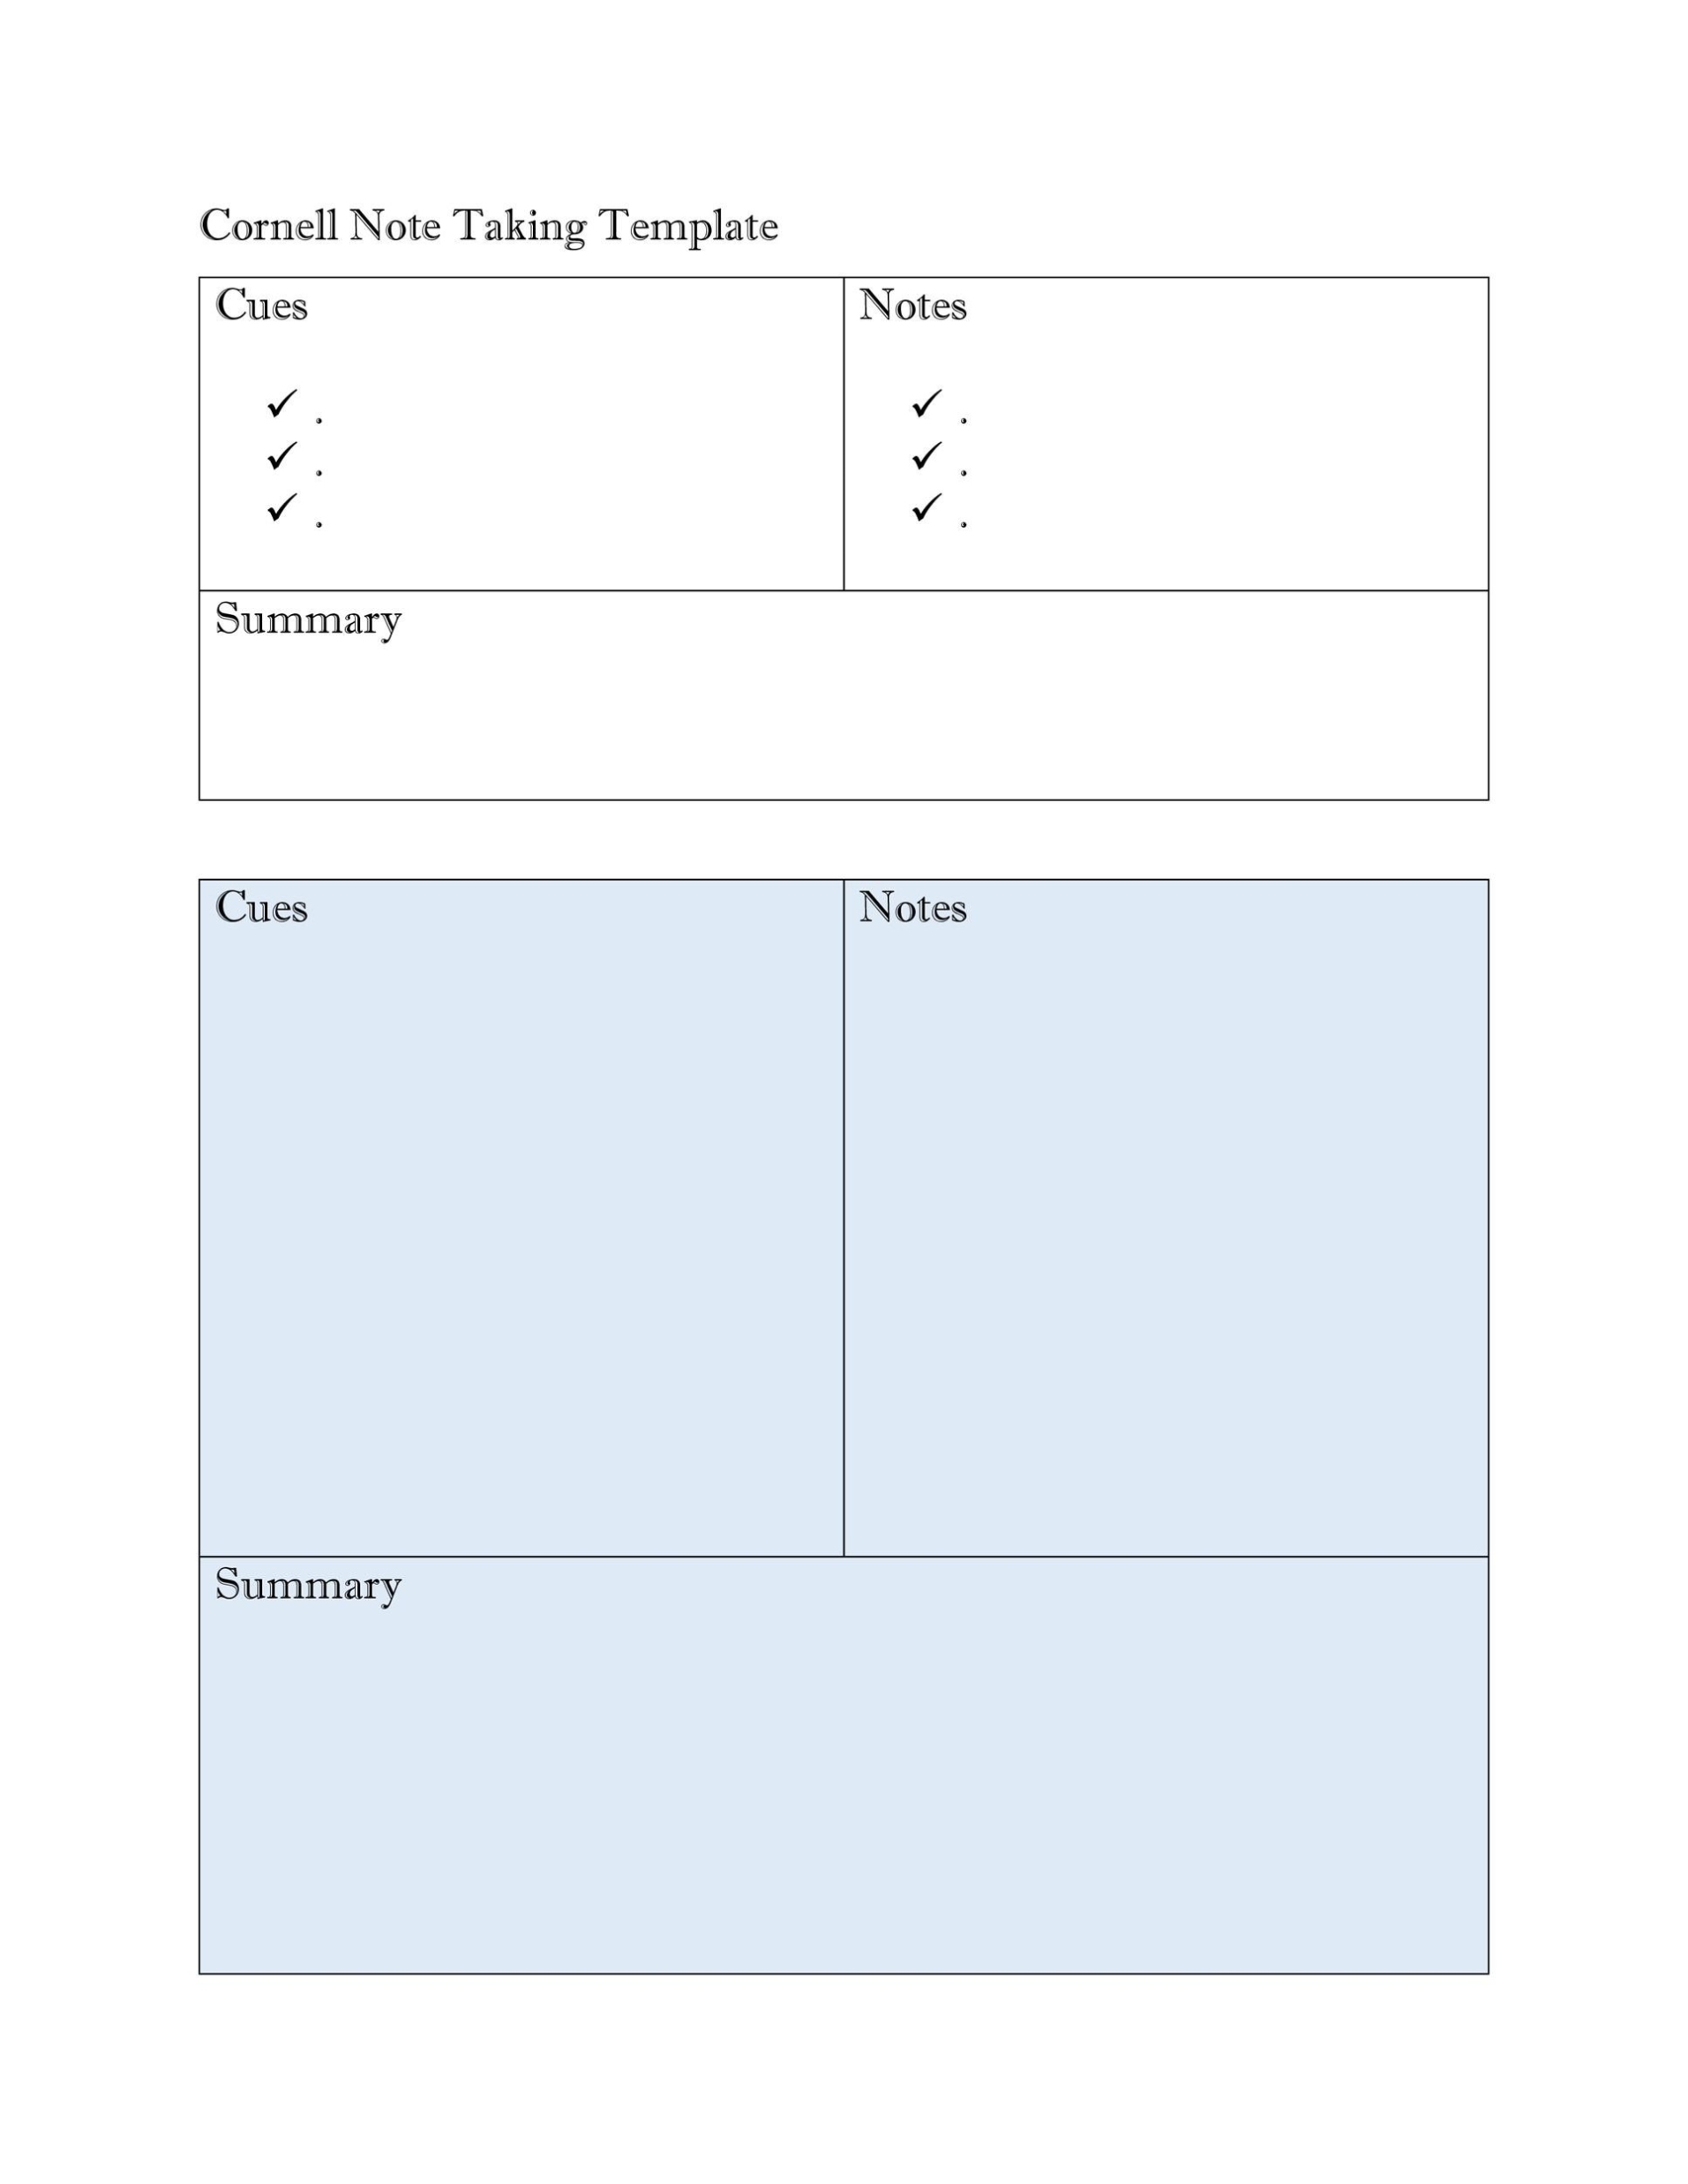 36 Cornell Notes Templates &amp; Examples [Word, Pdf] ᐅ Templatelab regarding Lecture Notes Template Word